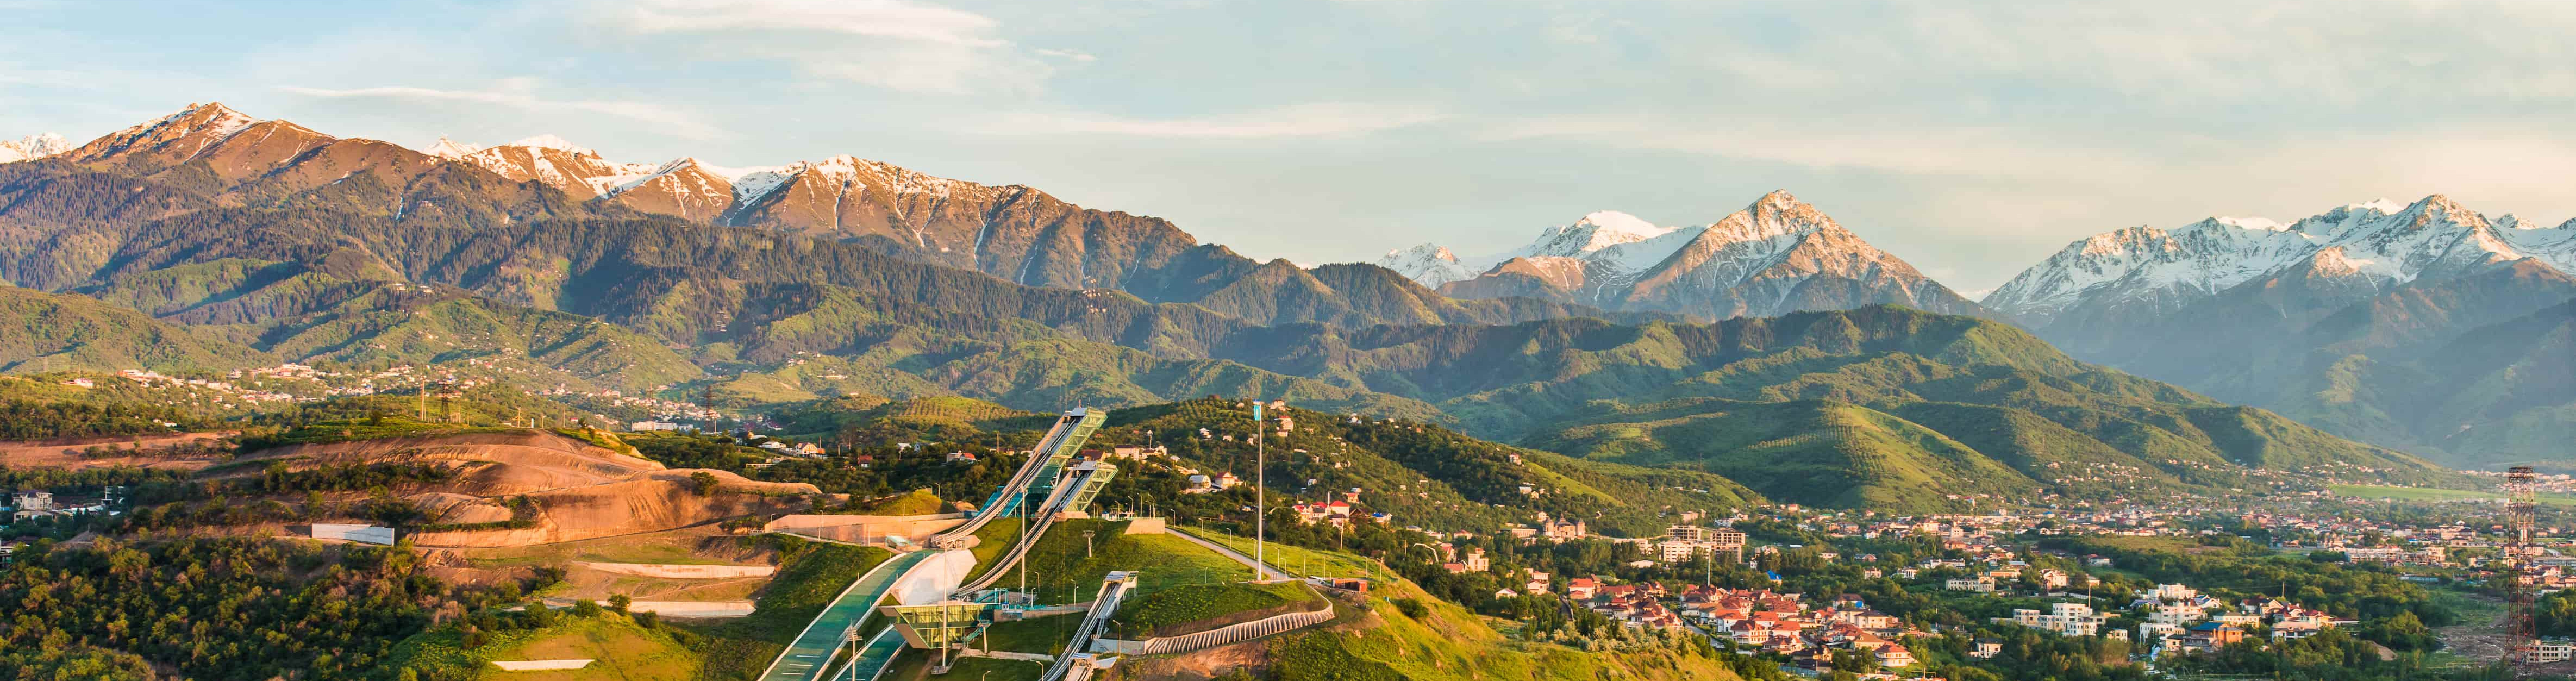 Travelling East: SkyUp Announces Flights to Almaty